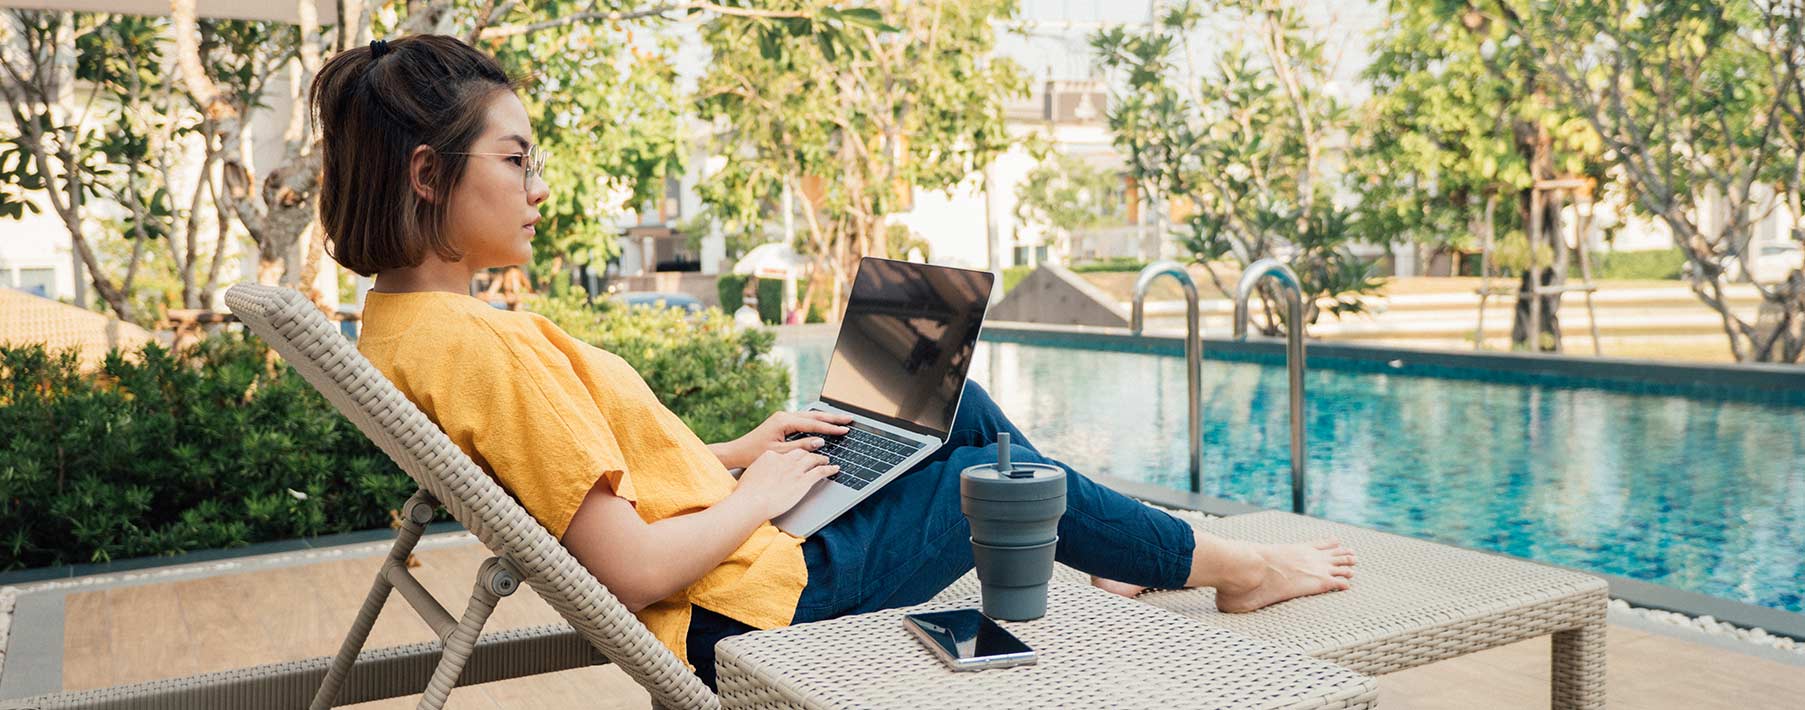 Woman using computer by a pool